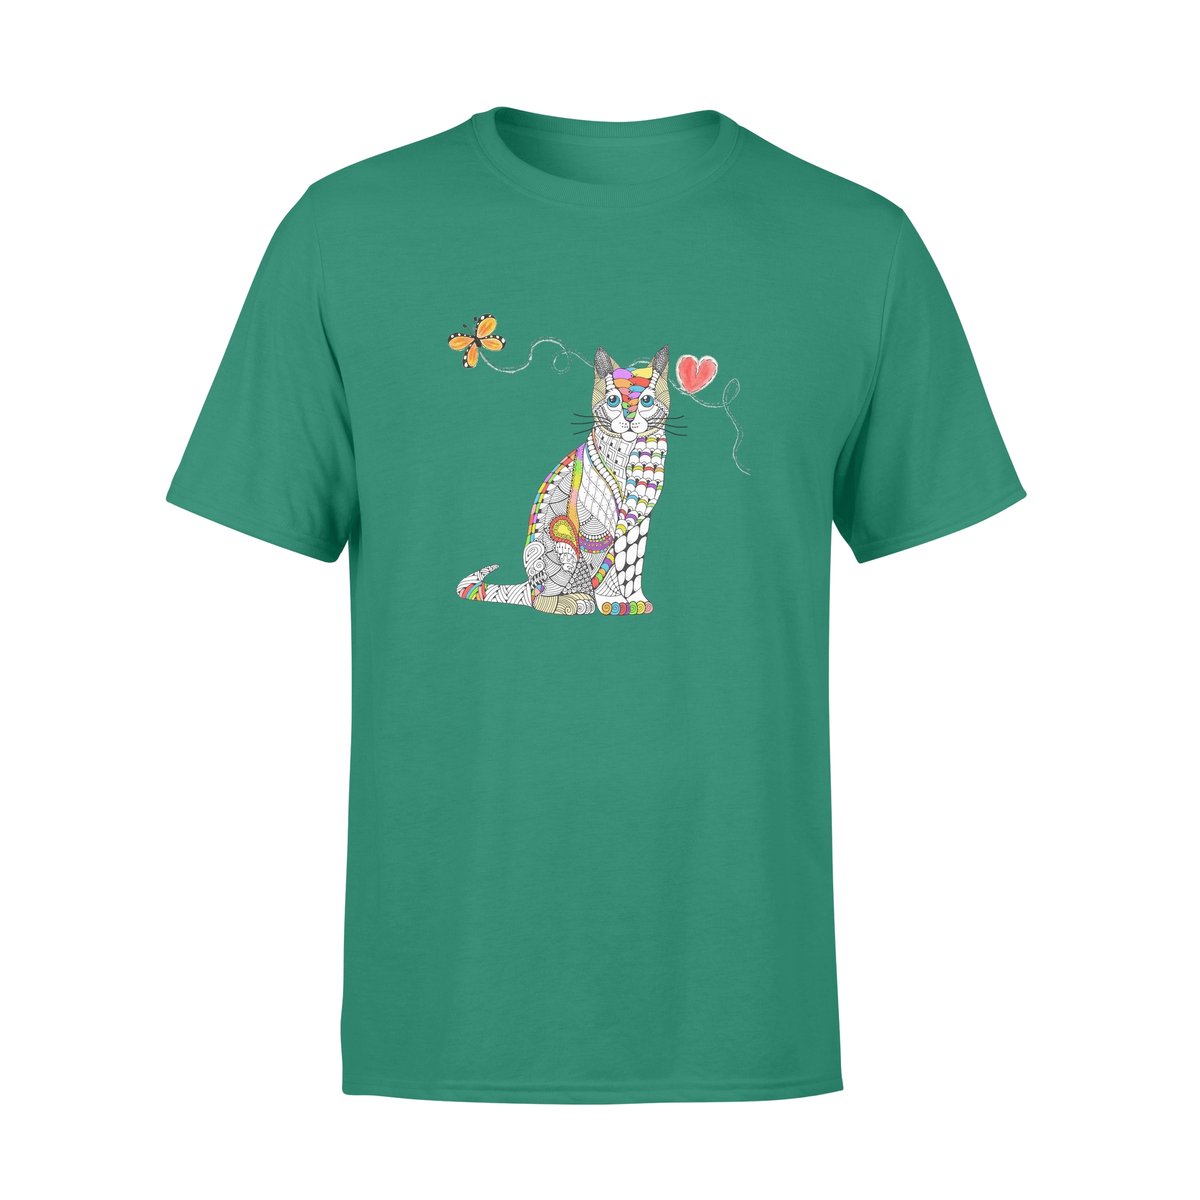 Zentangle Rainbow Cat – Premium T-Shirt,Gift For Cat Lover T-Shirt Hoodie All Color Size S-5Xl